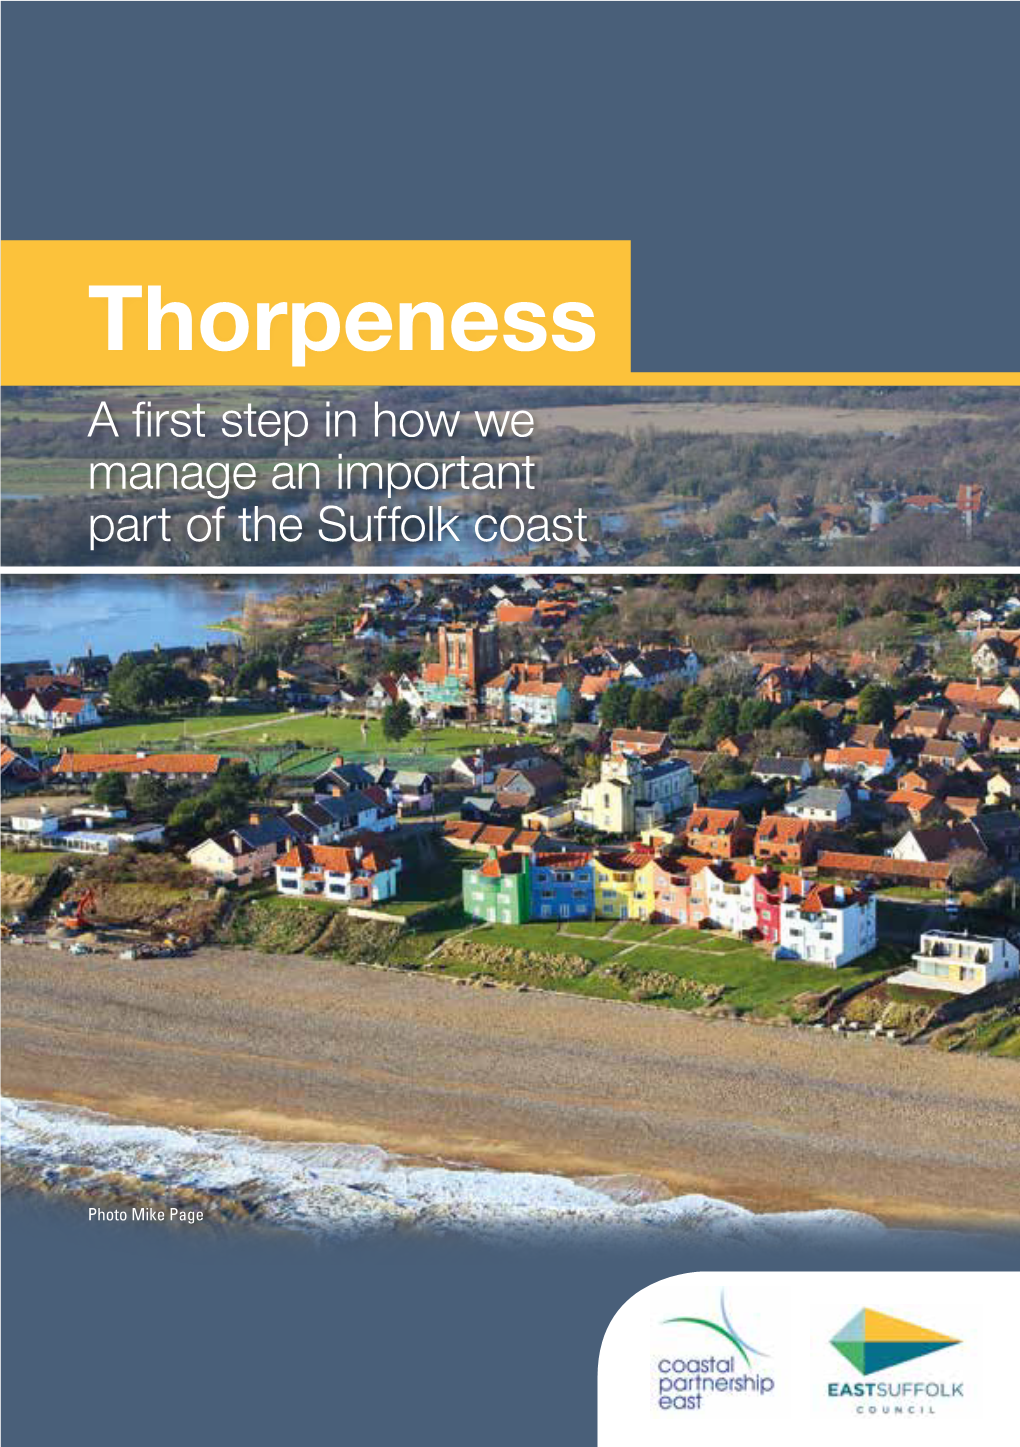 Thorpeness a First Step in How We Manage an Important Part of the Suffolk Coast